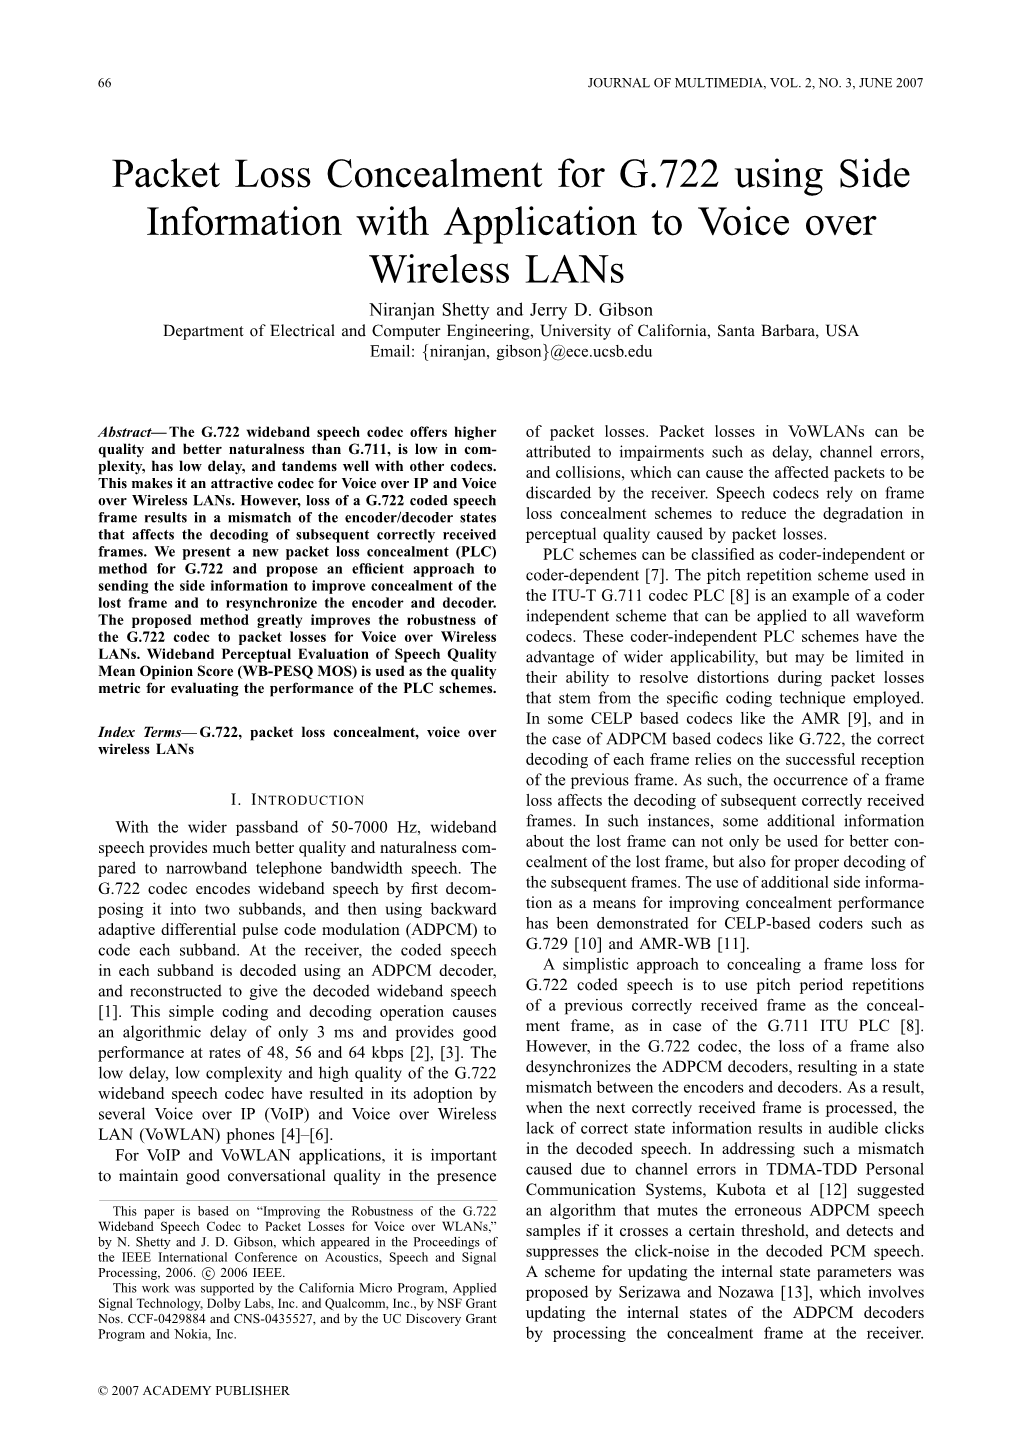 Packet Loss Concealment for G.722 Using Side Information with Application to Voice Over Wireless Lans Niranjan Shetty and Jerry D